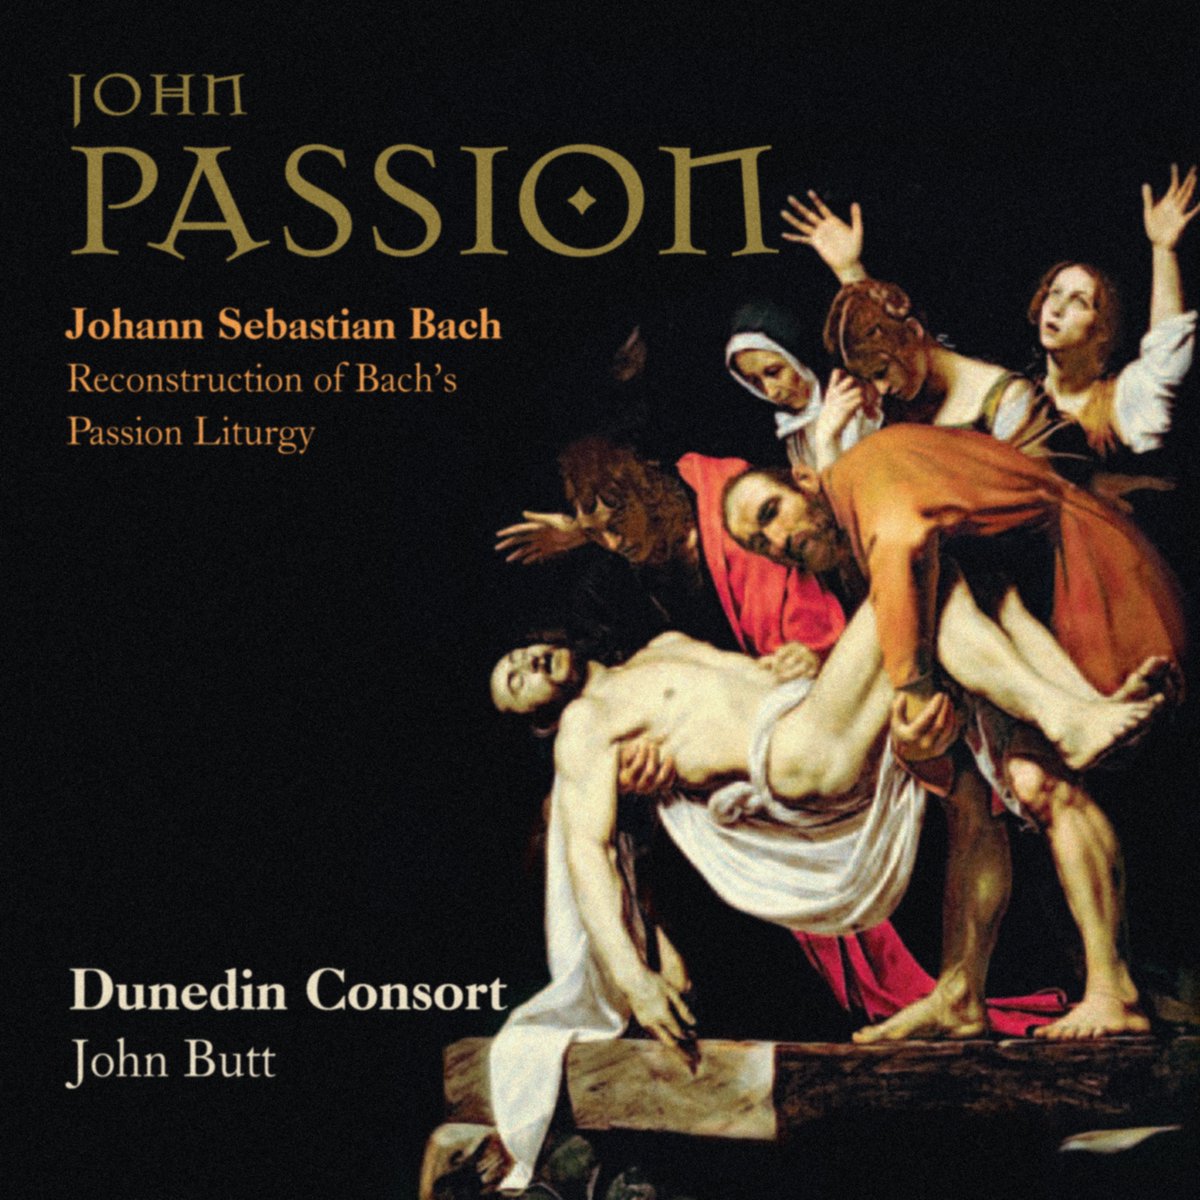 Two not-to-be-missed performances of Bach's John Passion by @DunedinConsort:
- Friday 15 March @smitf_london
- Saturday 16 March @StMarysCathEdin 
Feat. @nickmulroy, #AnnaDennis, @bethtaylormezzo, @StephanLoges, @bobdaviesbari

We loved recording this with them back in 2013.